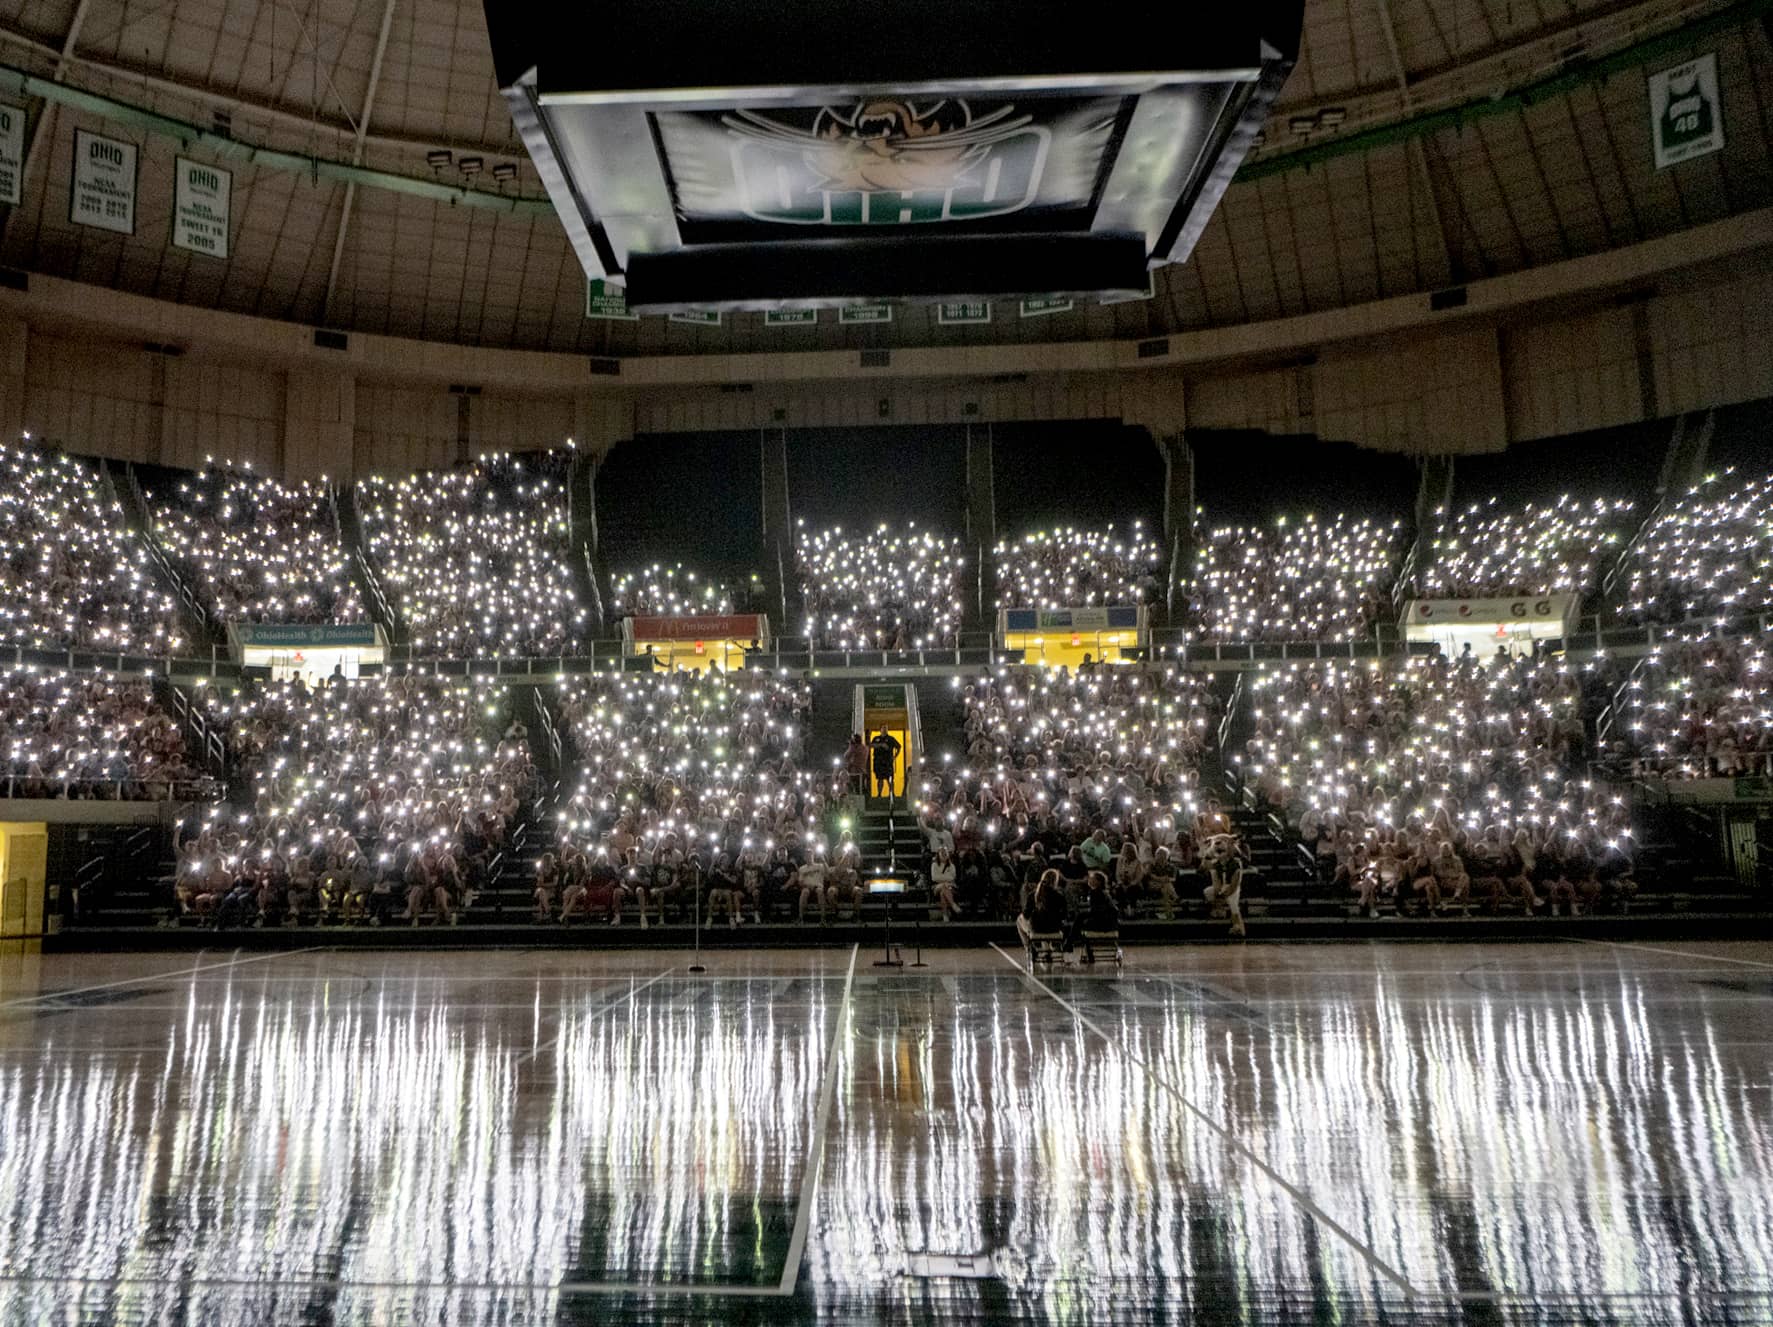 Students light up the Convocation Center during the First Year Student Convocation.